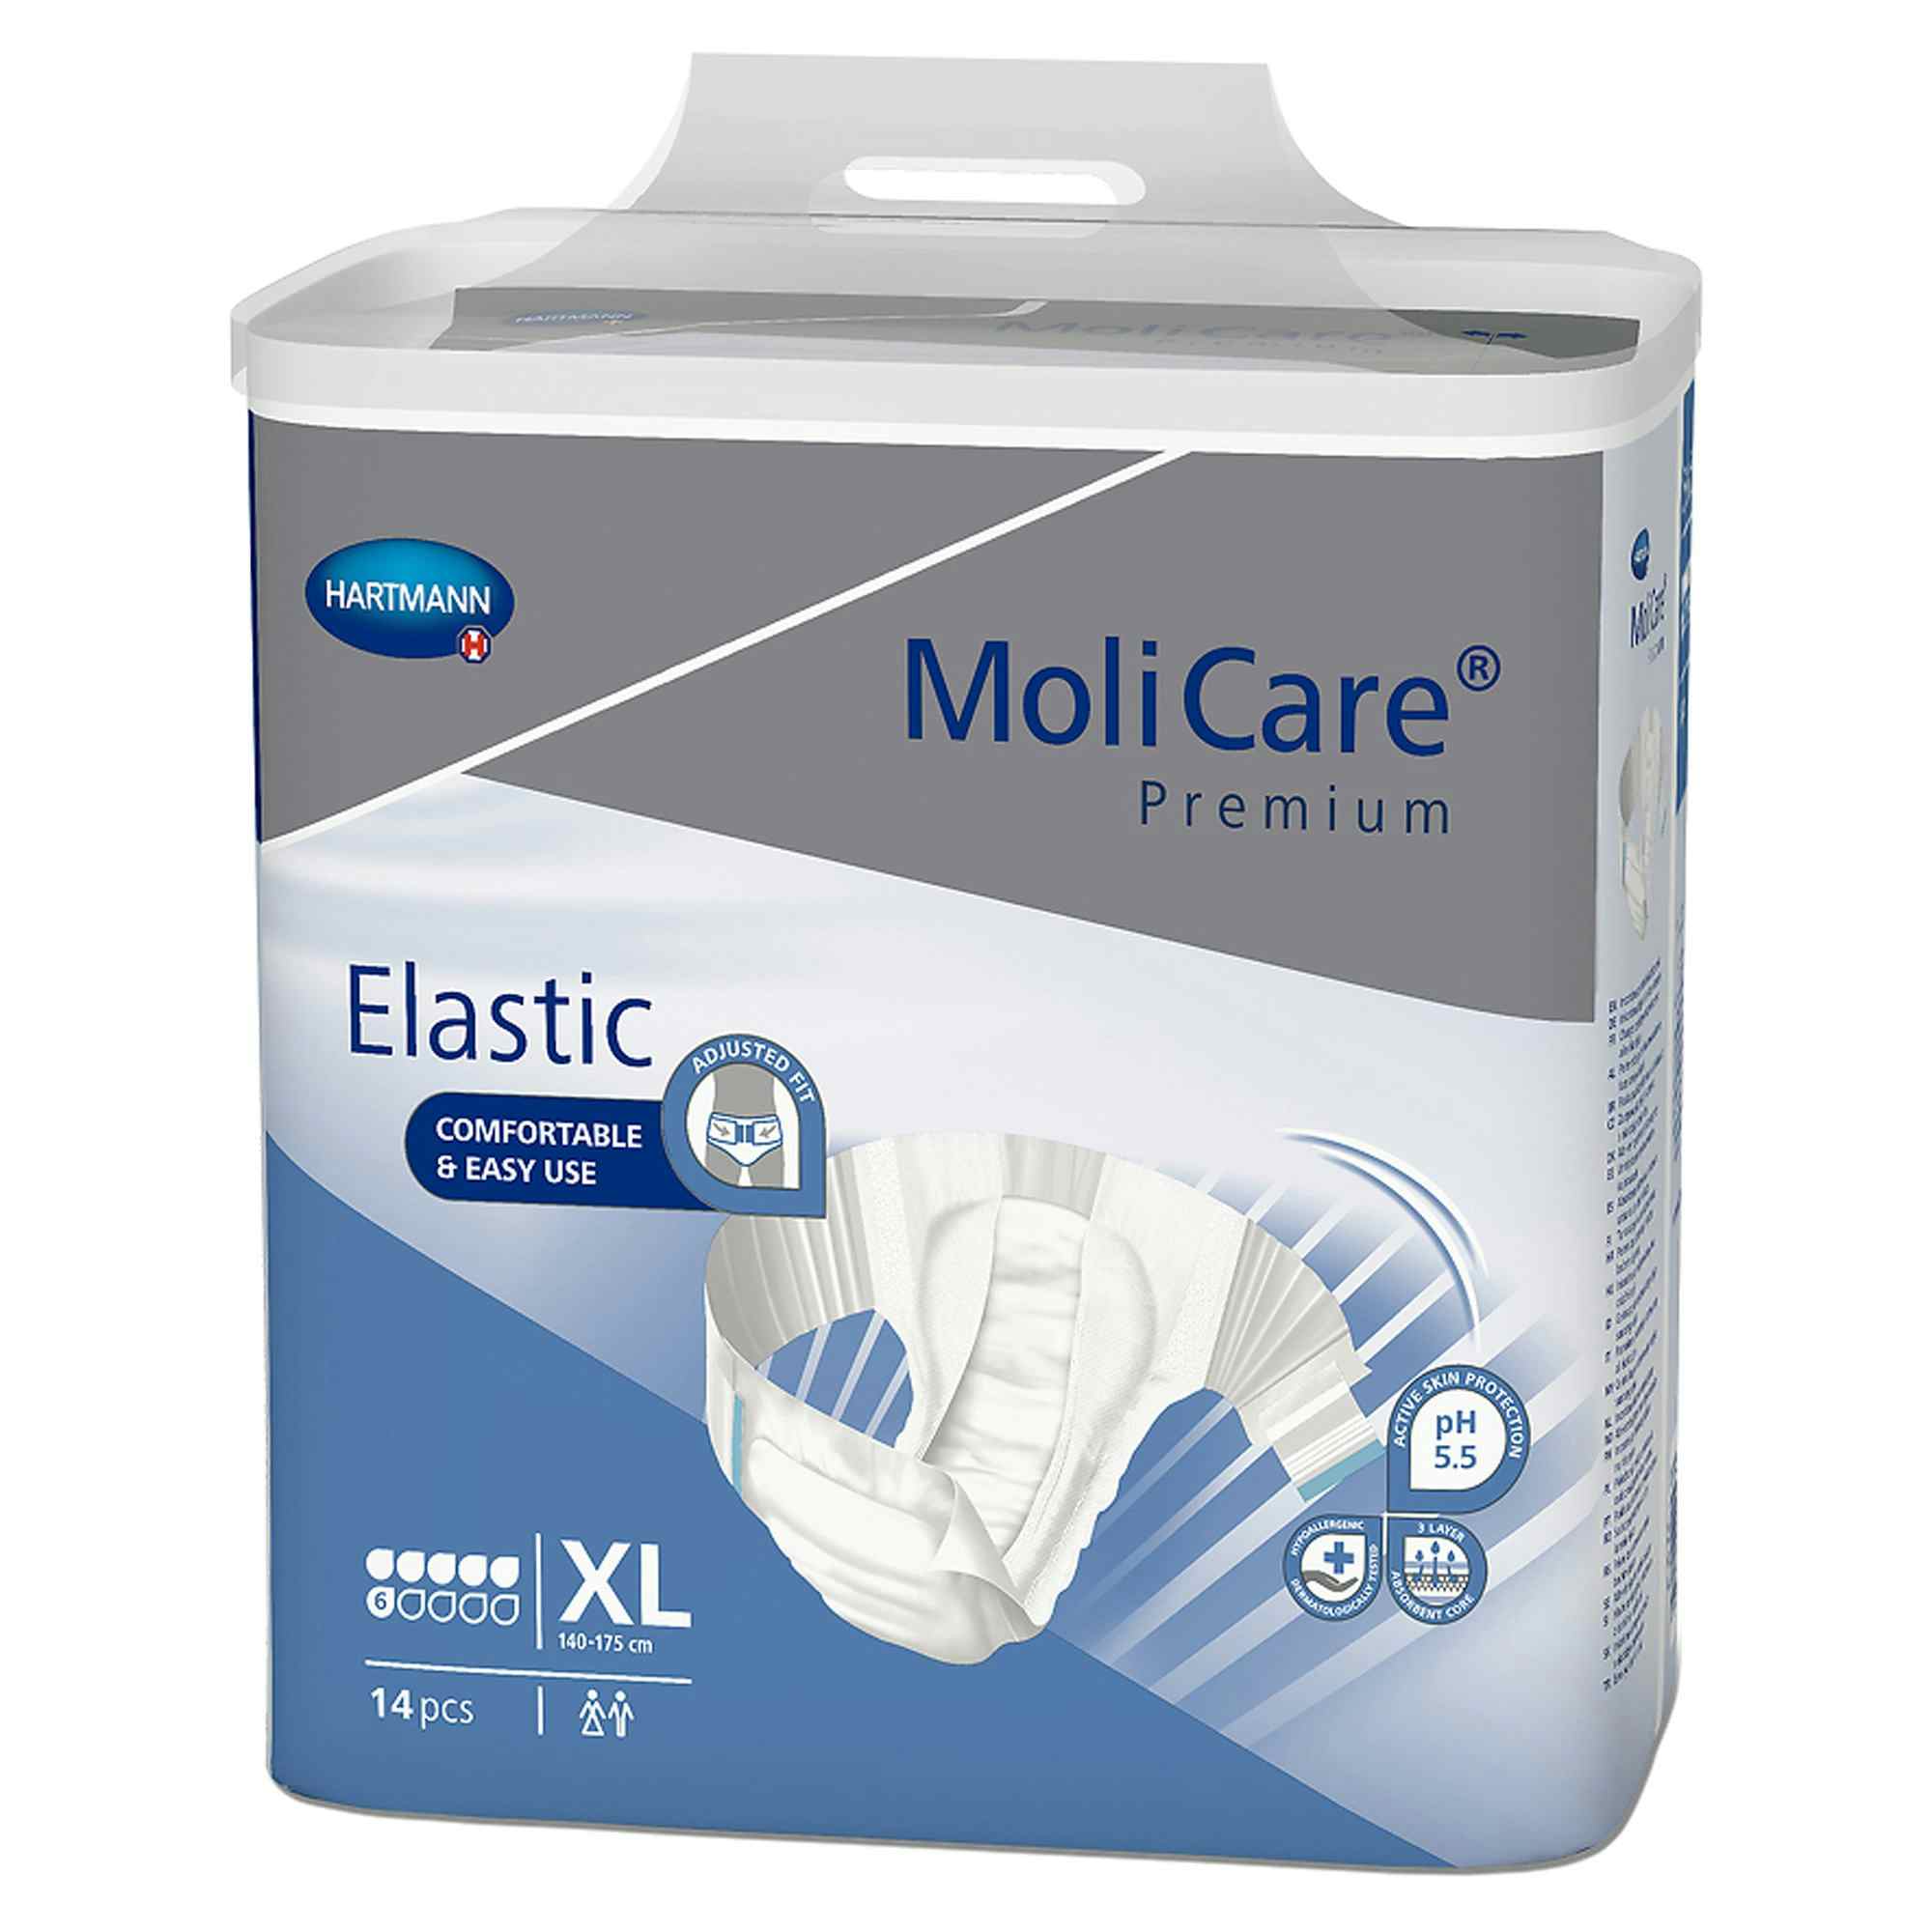 MoliCare Premium Elastic 6D Disposable Brief Adult Diapers with Tabs, Moderate Absorbency, 165274, X-Large (55-69") - Case of 56